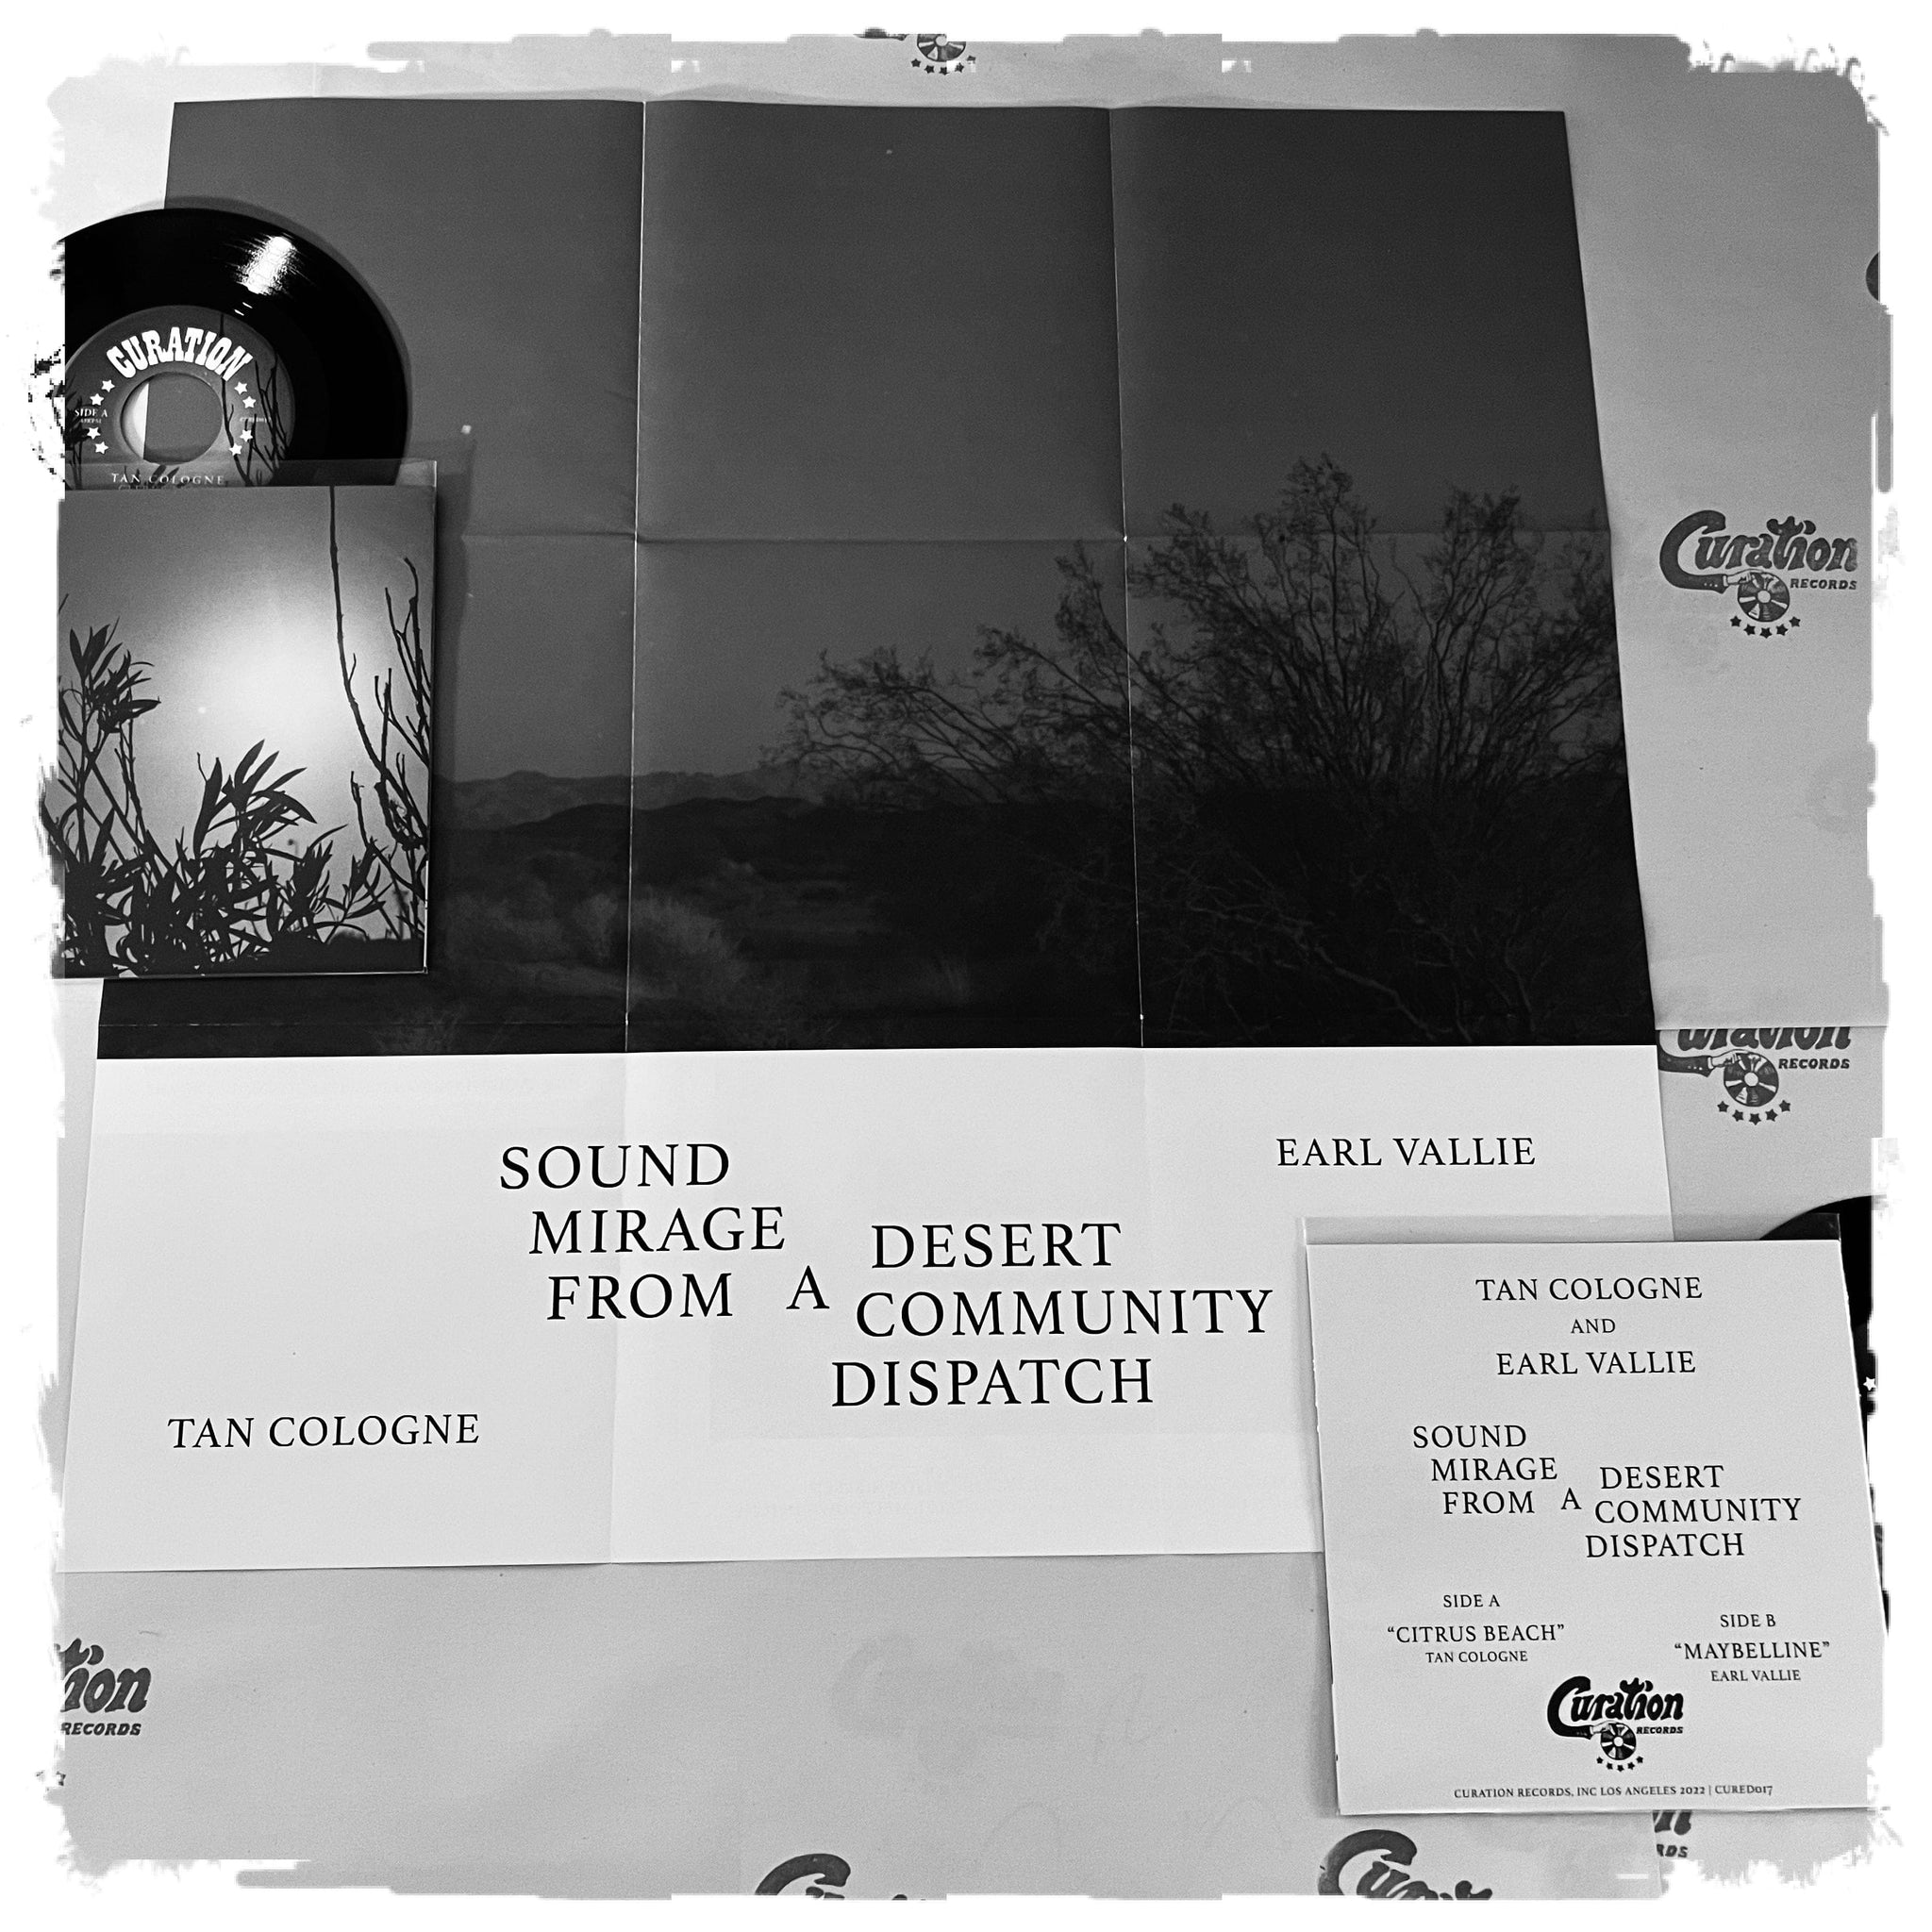 Sound Mirage From A Desert Community Dispatch - Tan Cologne / Earl Vallie - 7" Vinyl (6912415465554)